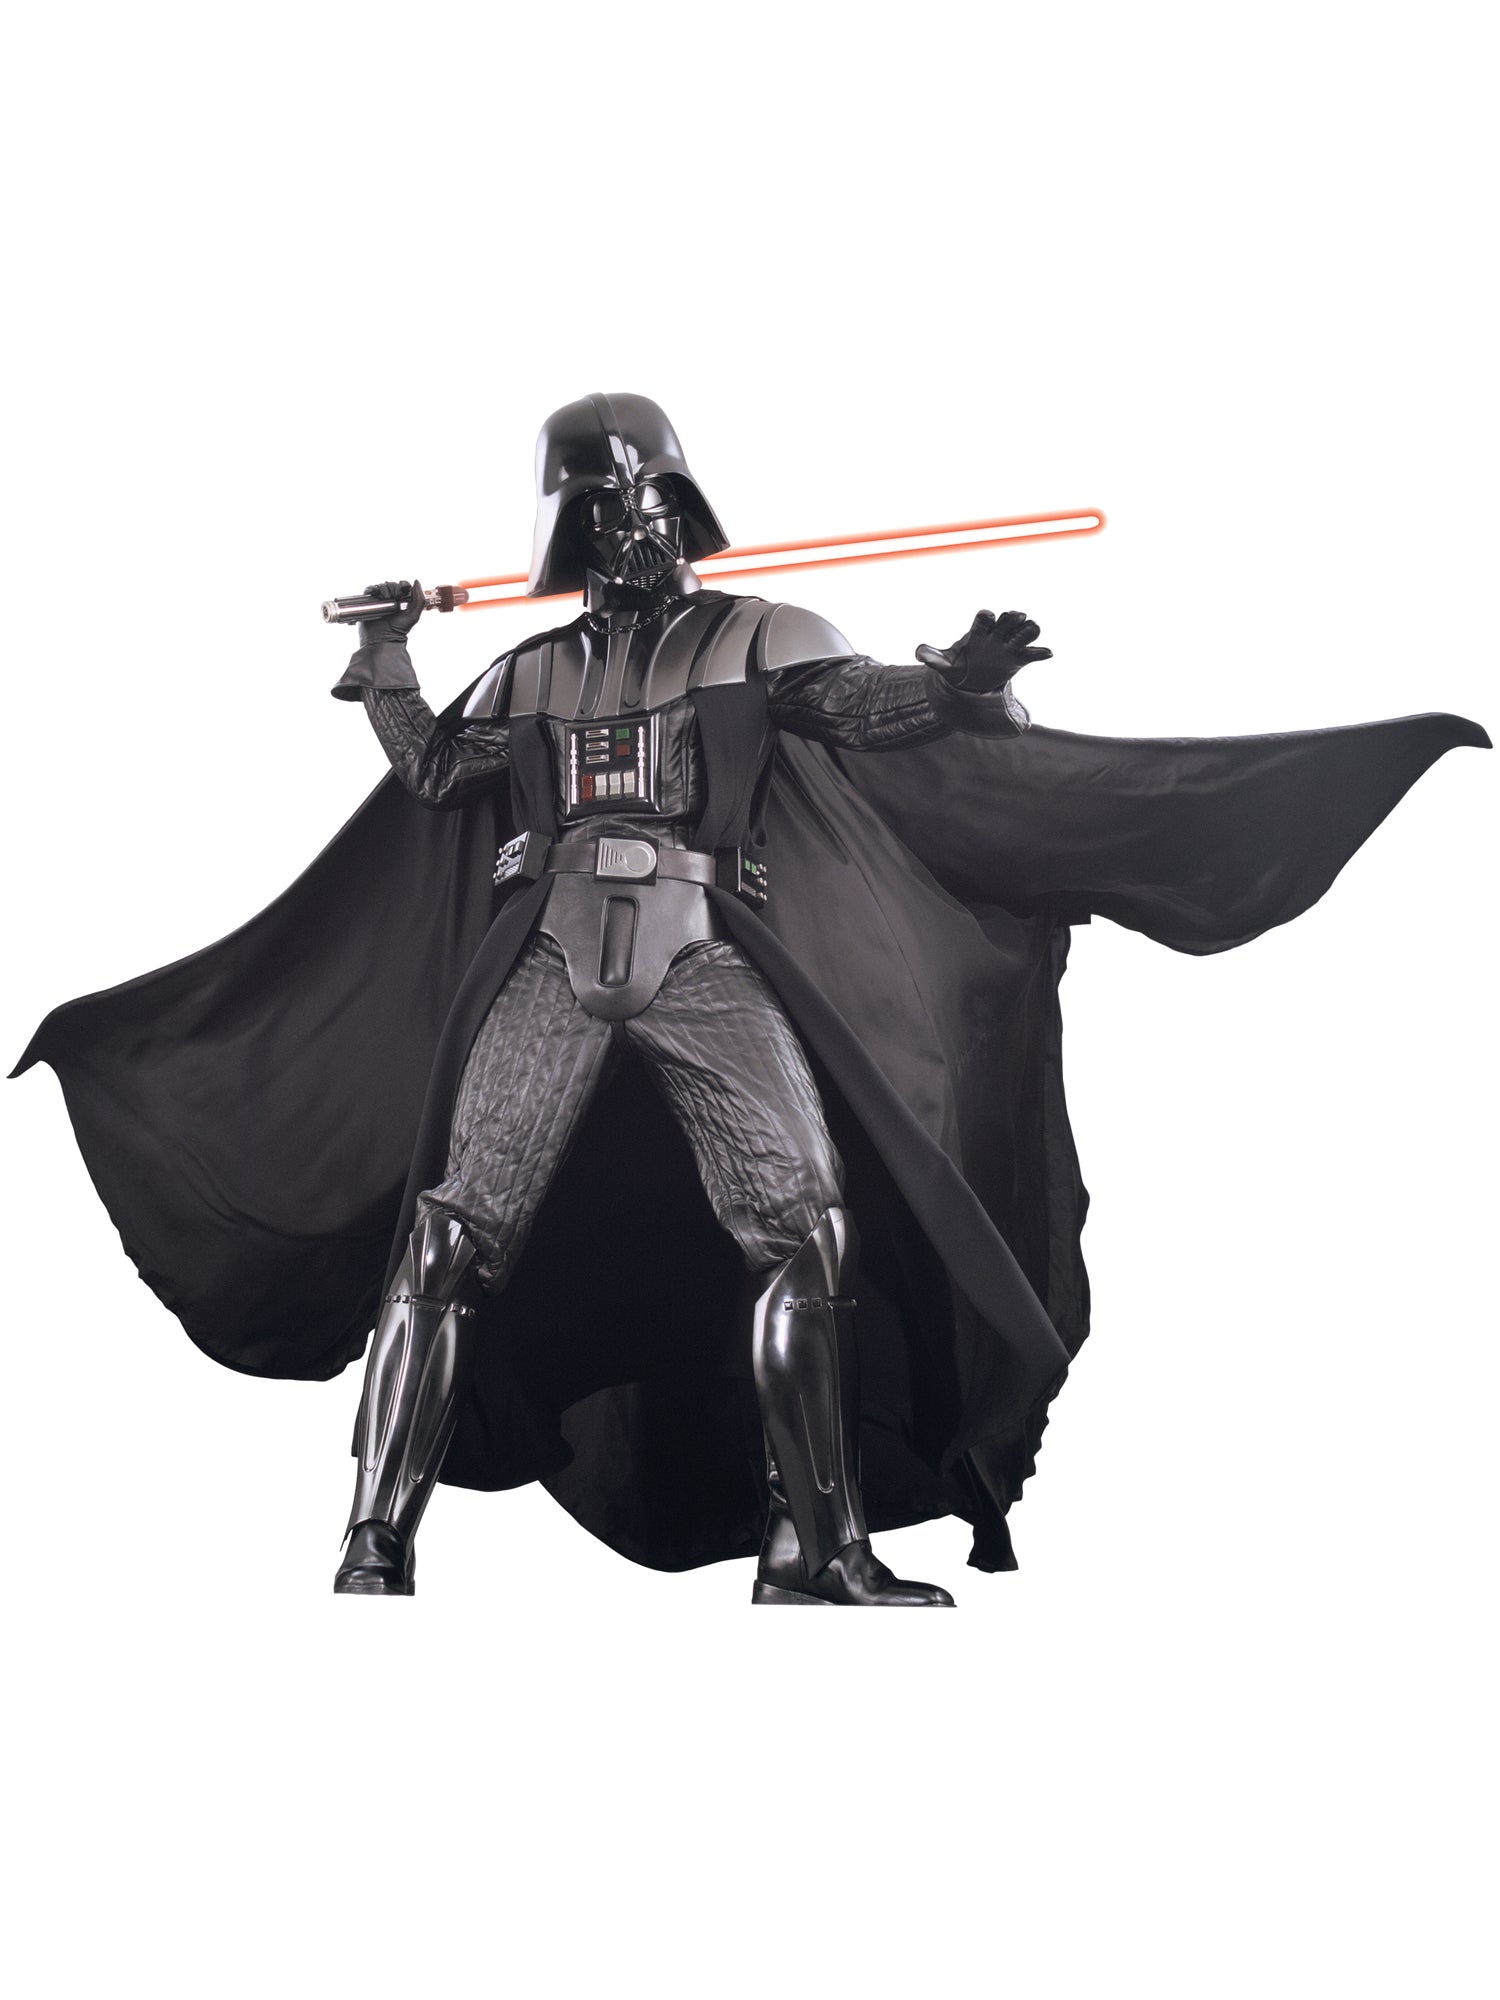 Darth Vader, Revenge Of The Sith, Episode III, Revenge Of The Sith, Multi, Star Wars, Adult Costume, Standard, Front